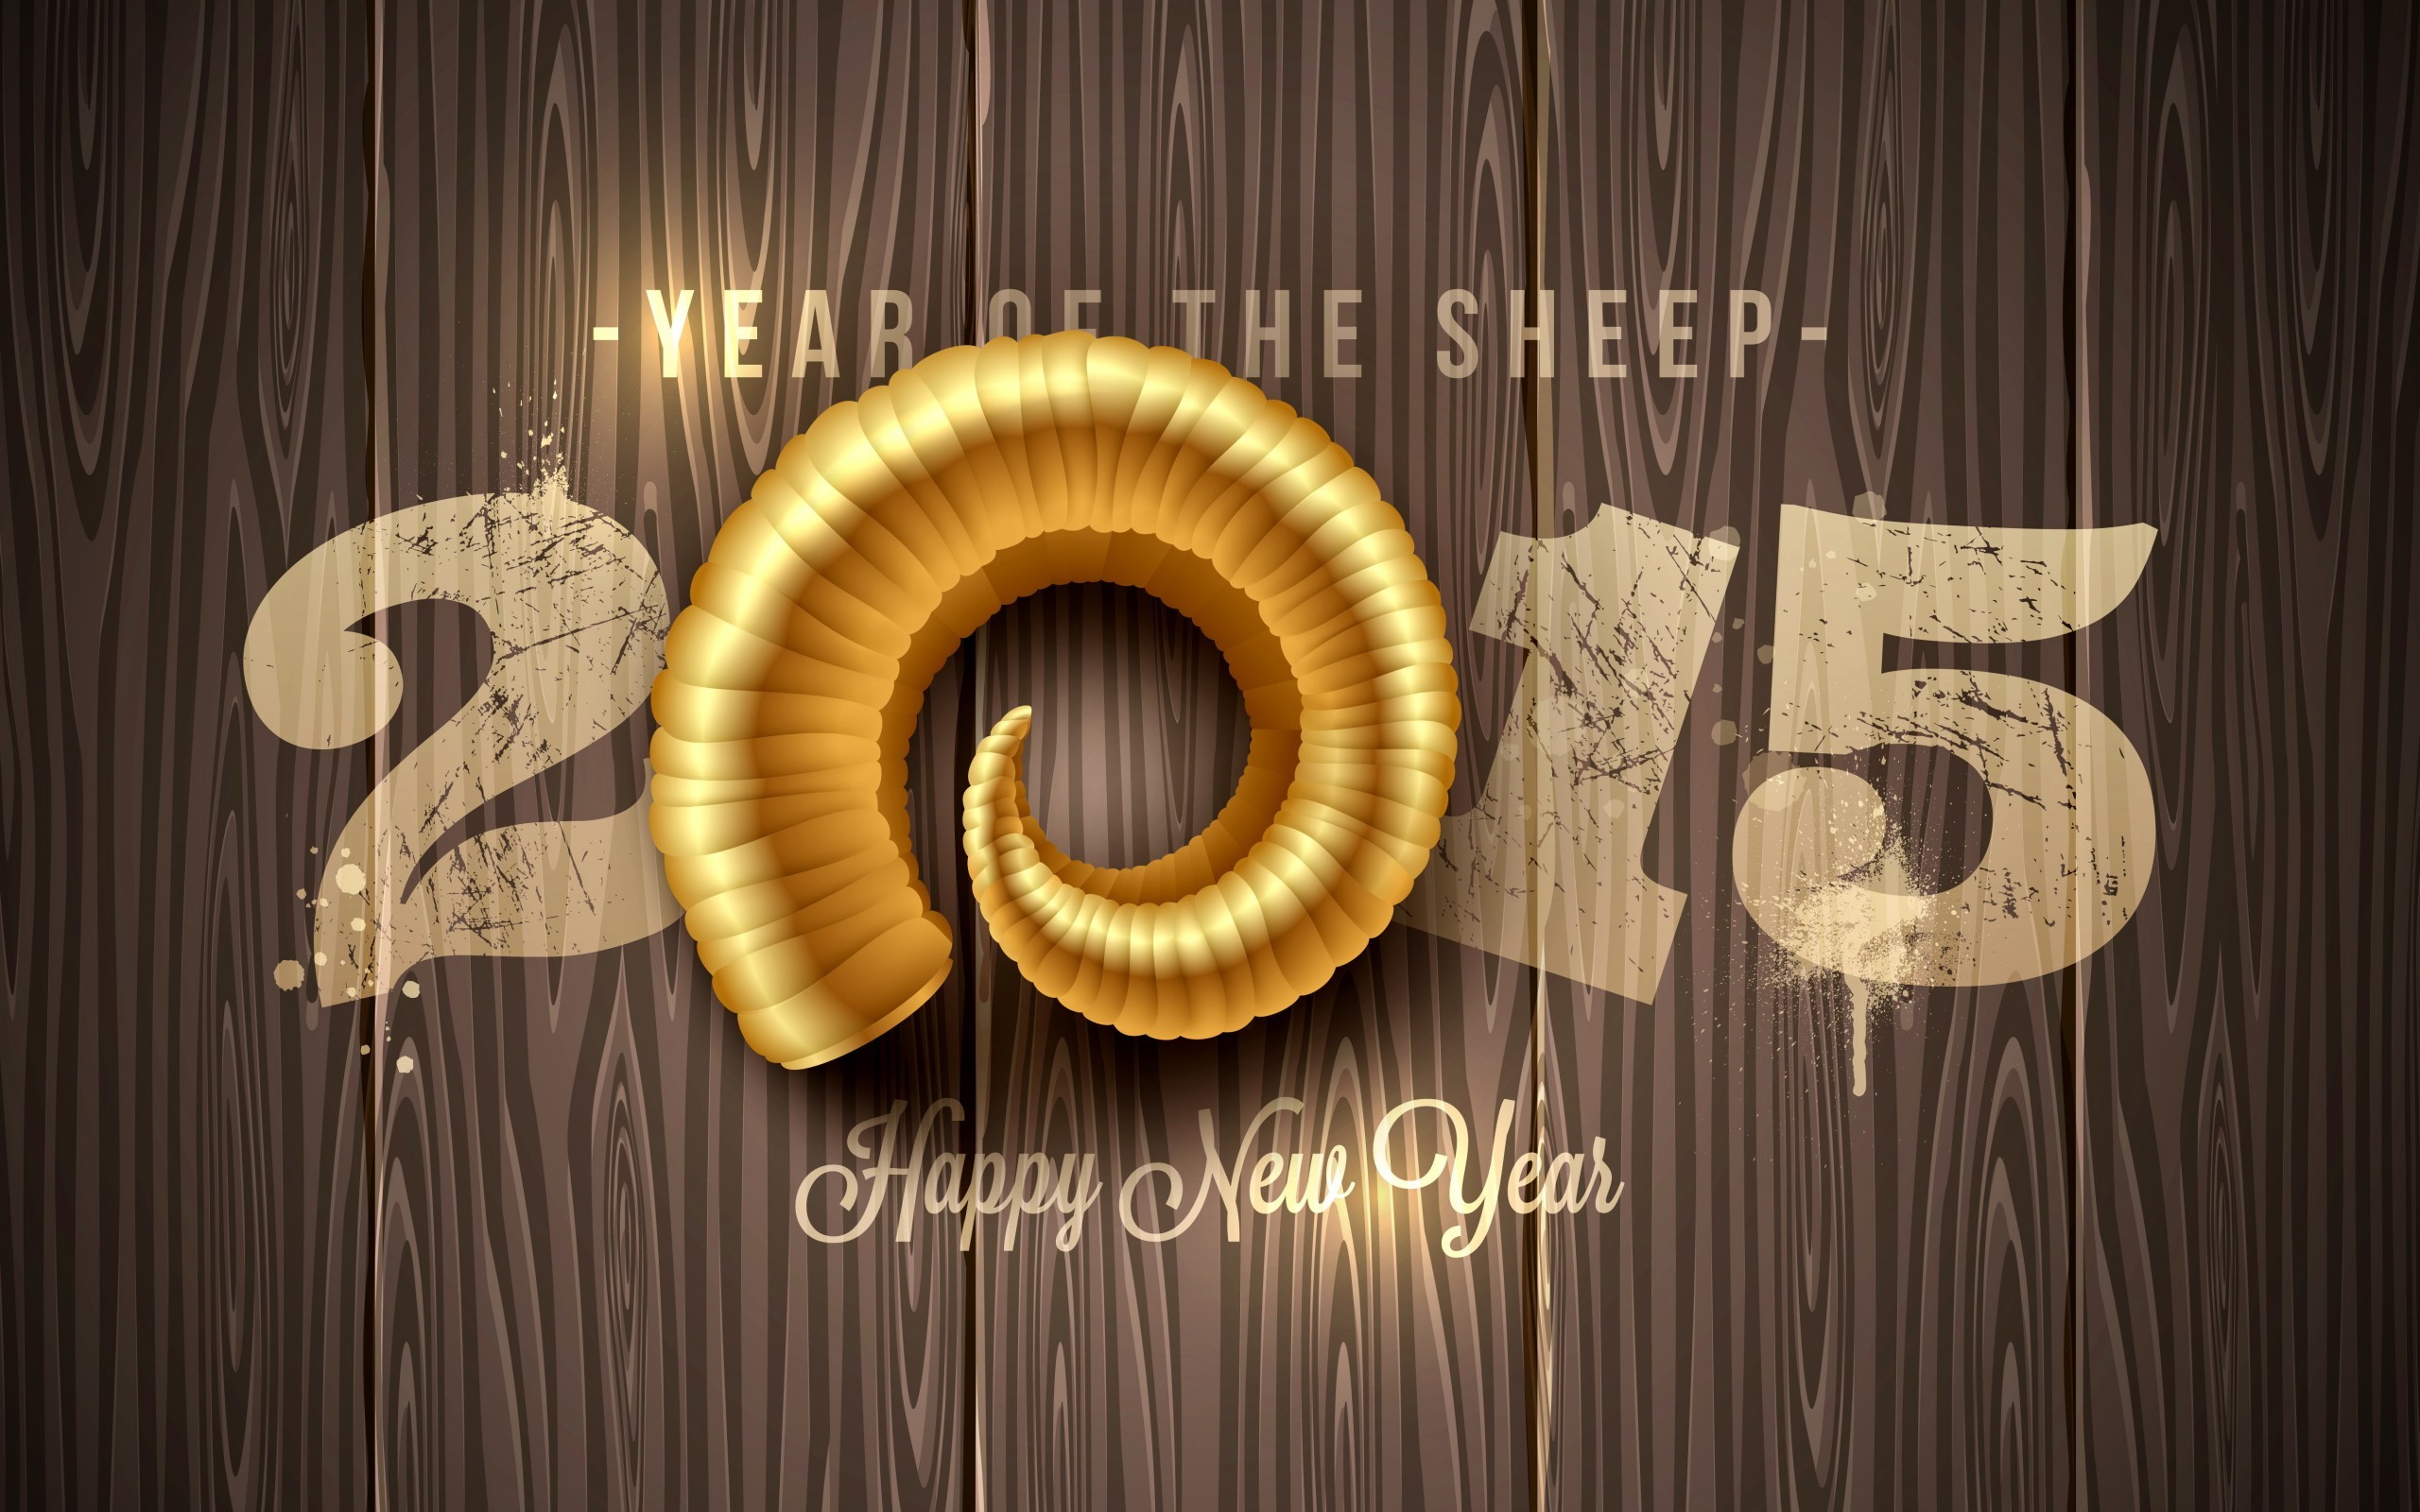 General 2560x1600 Christmas New Year sheep anime horns wooden surface 2015 (Year) typography digital art